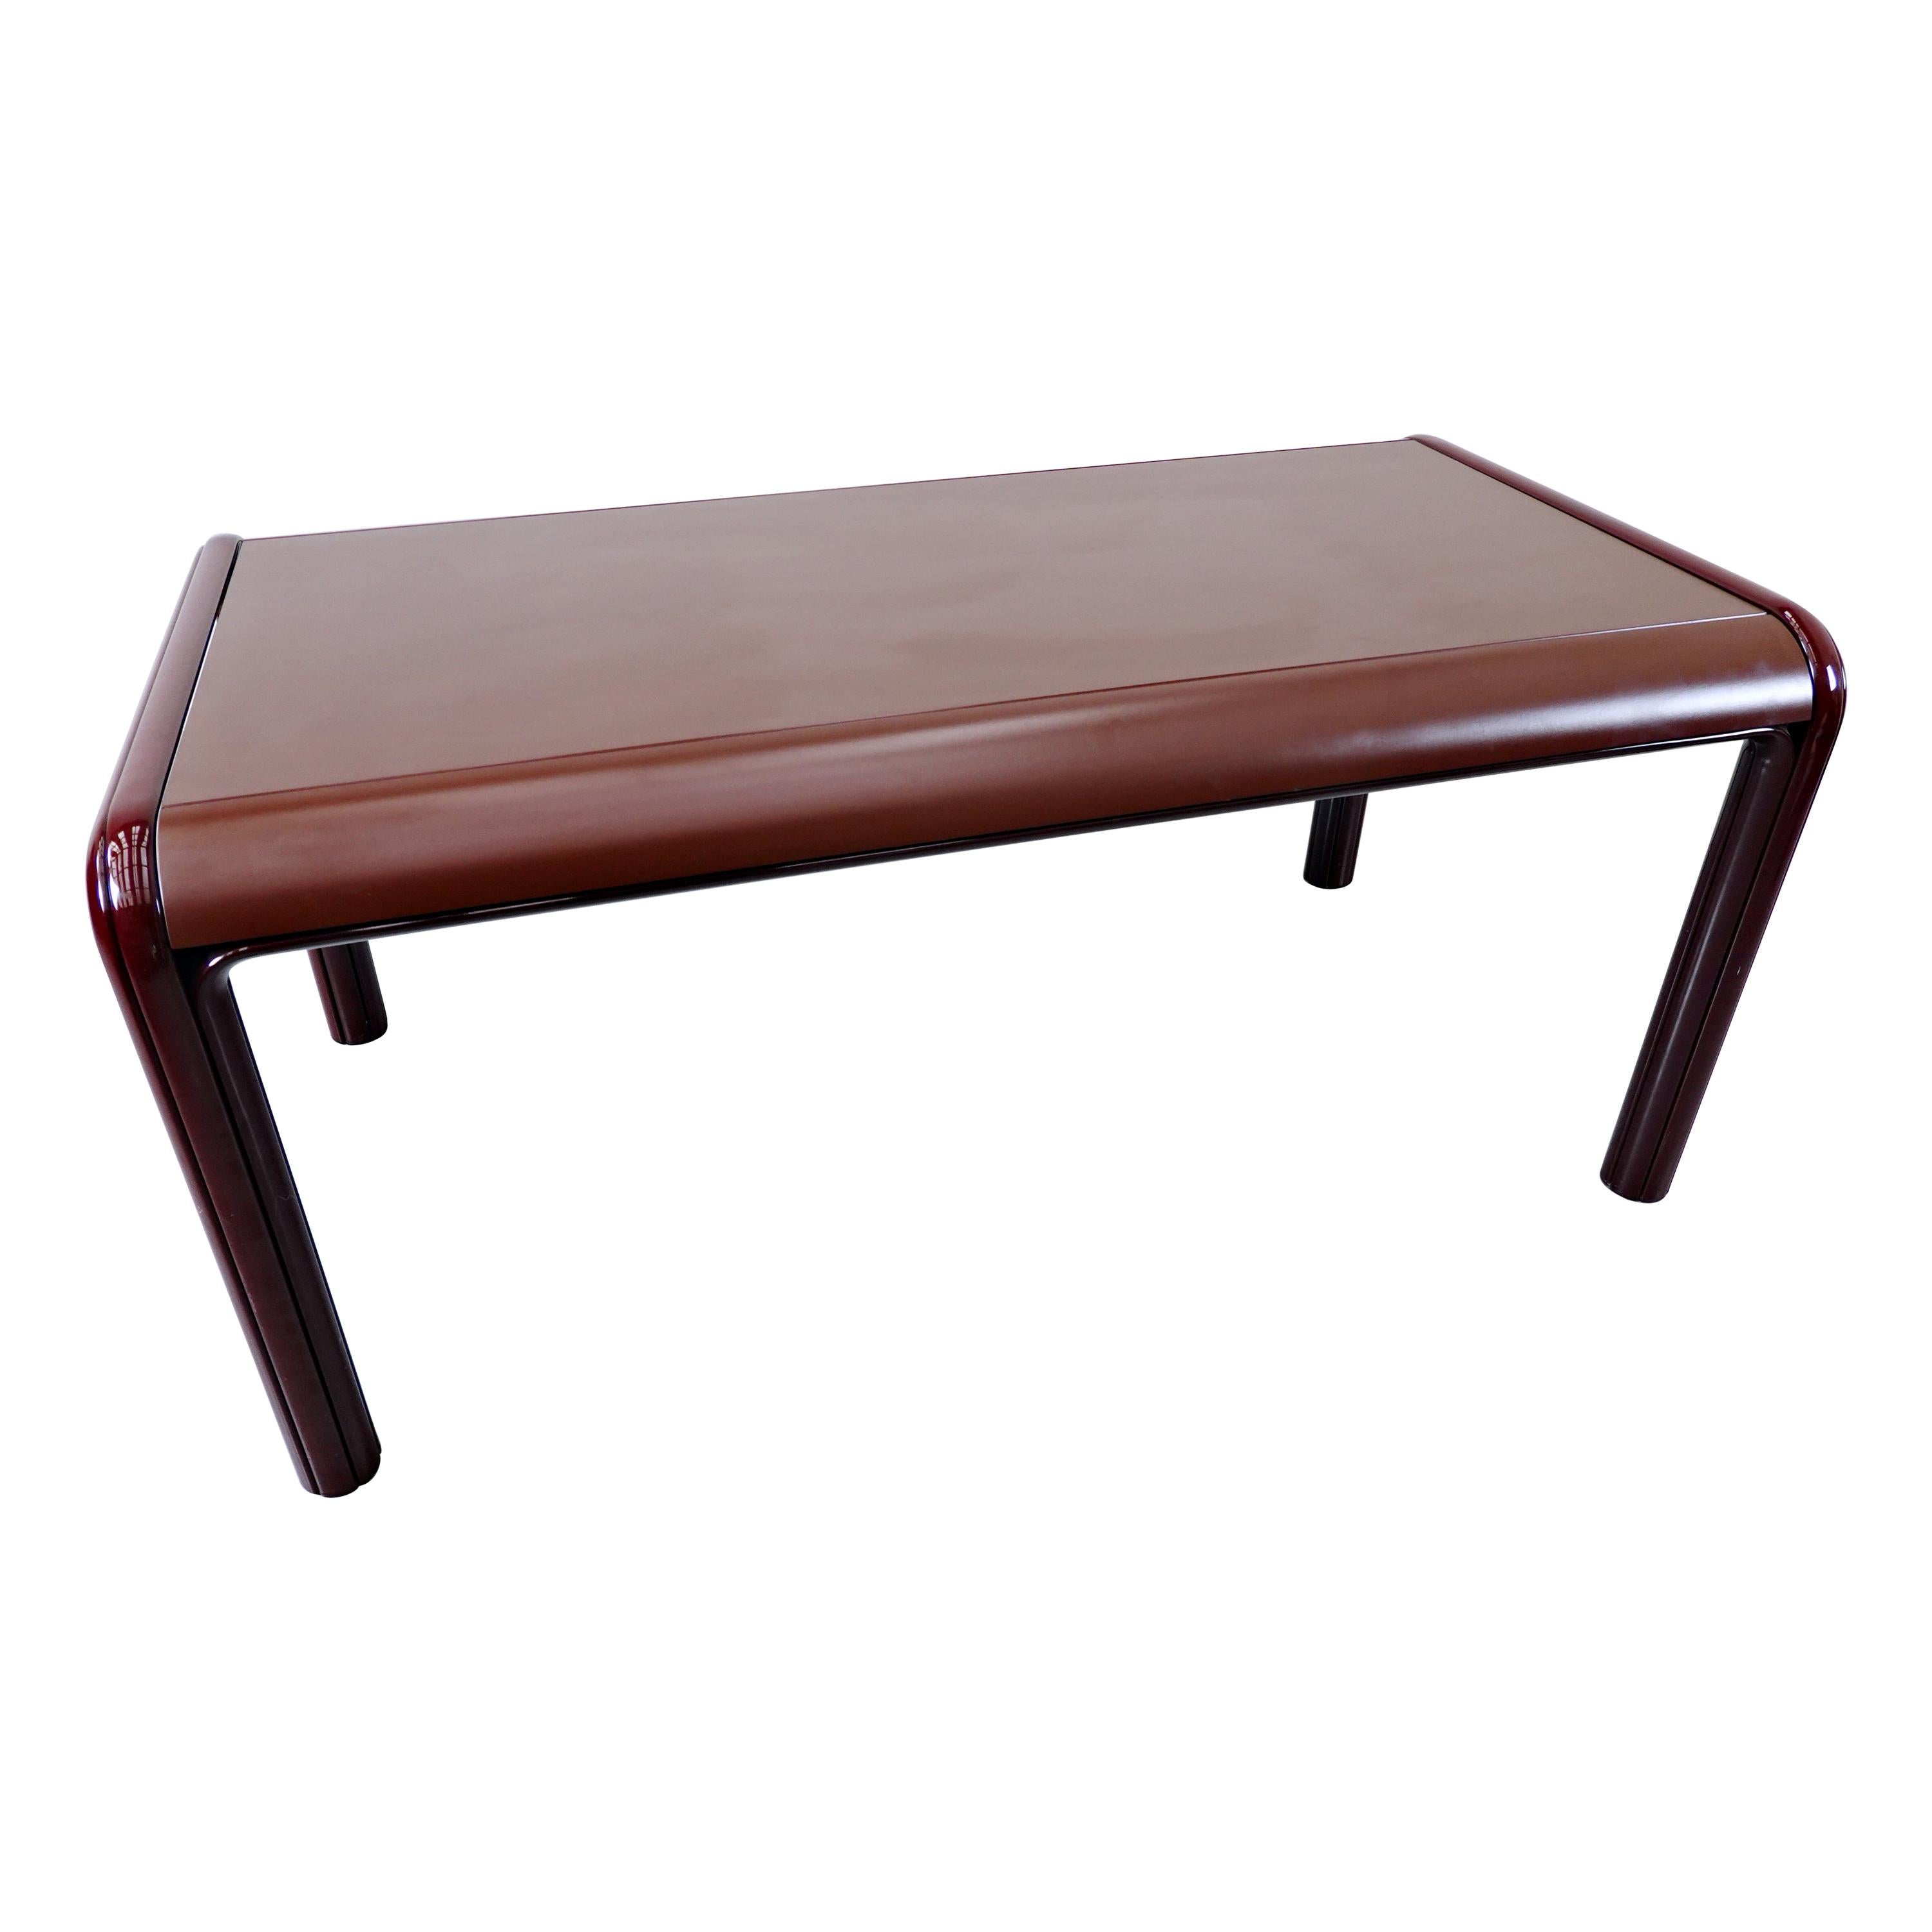 Gae Aulenti Mid-Century Modern Red Table for Knoll International